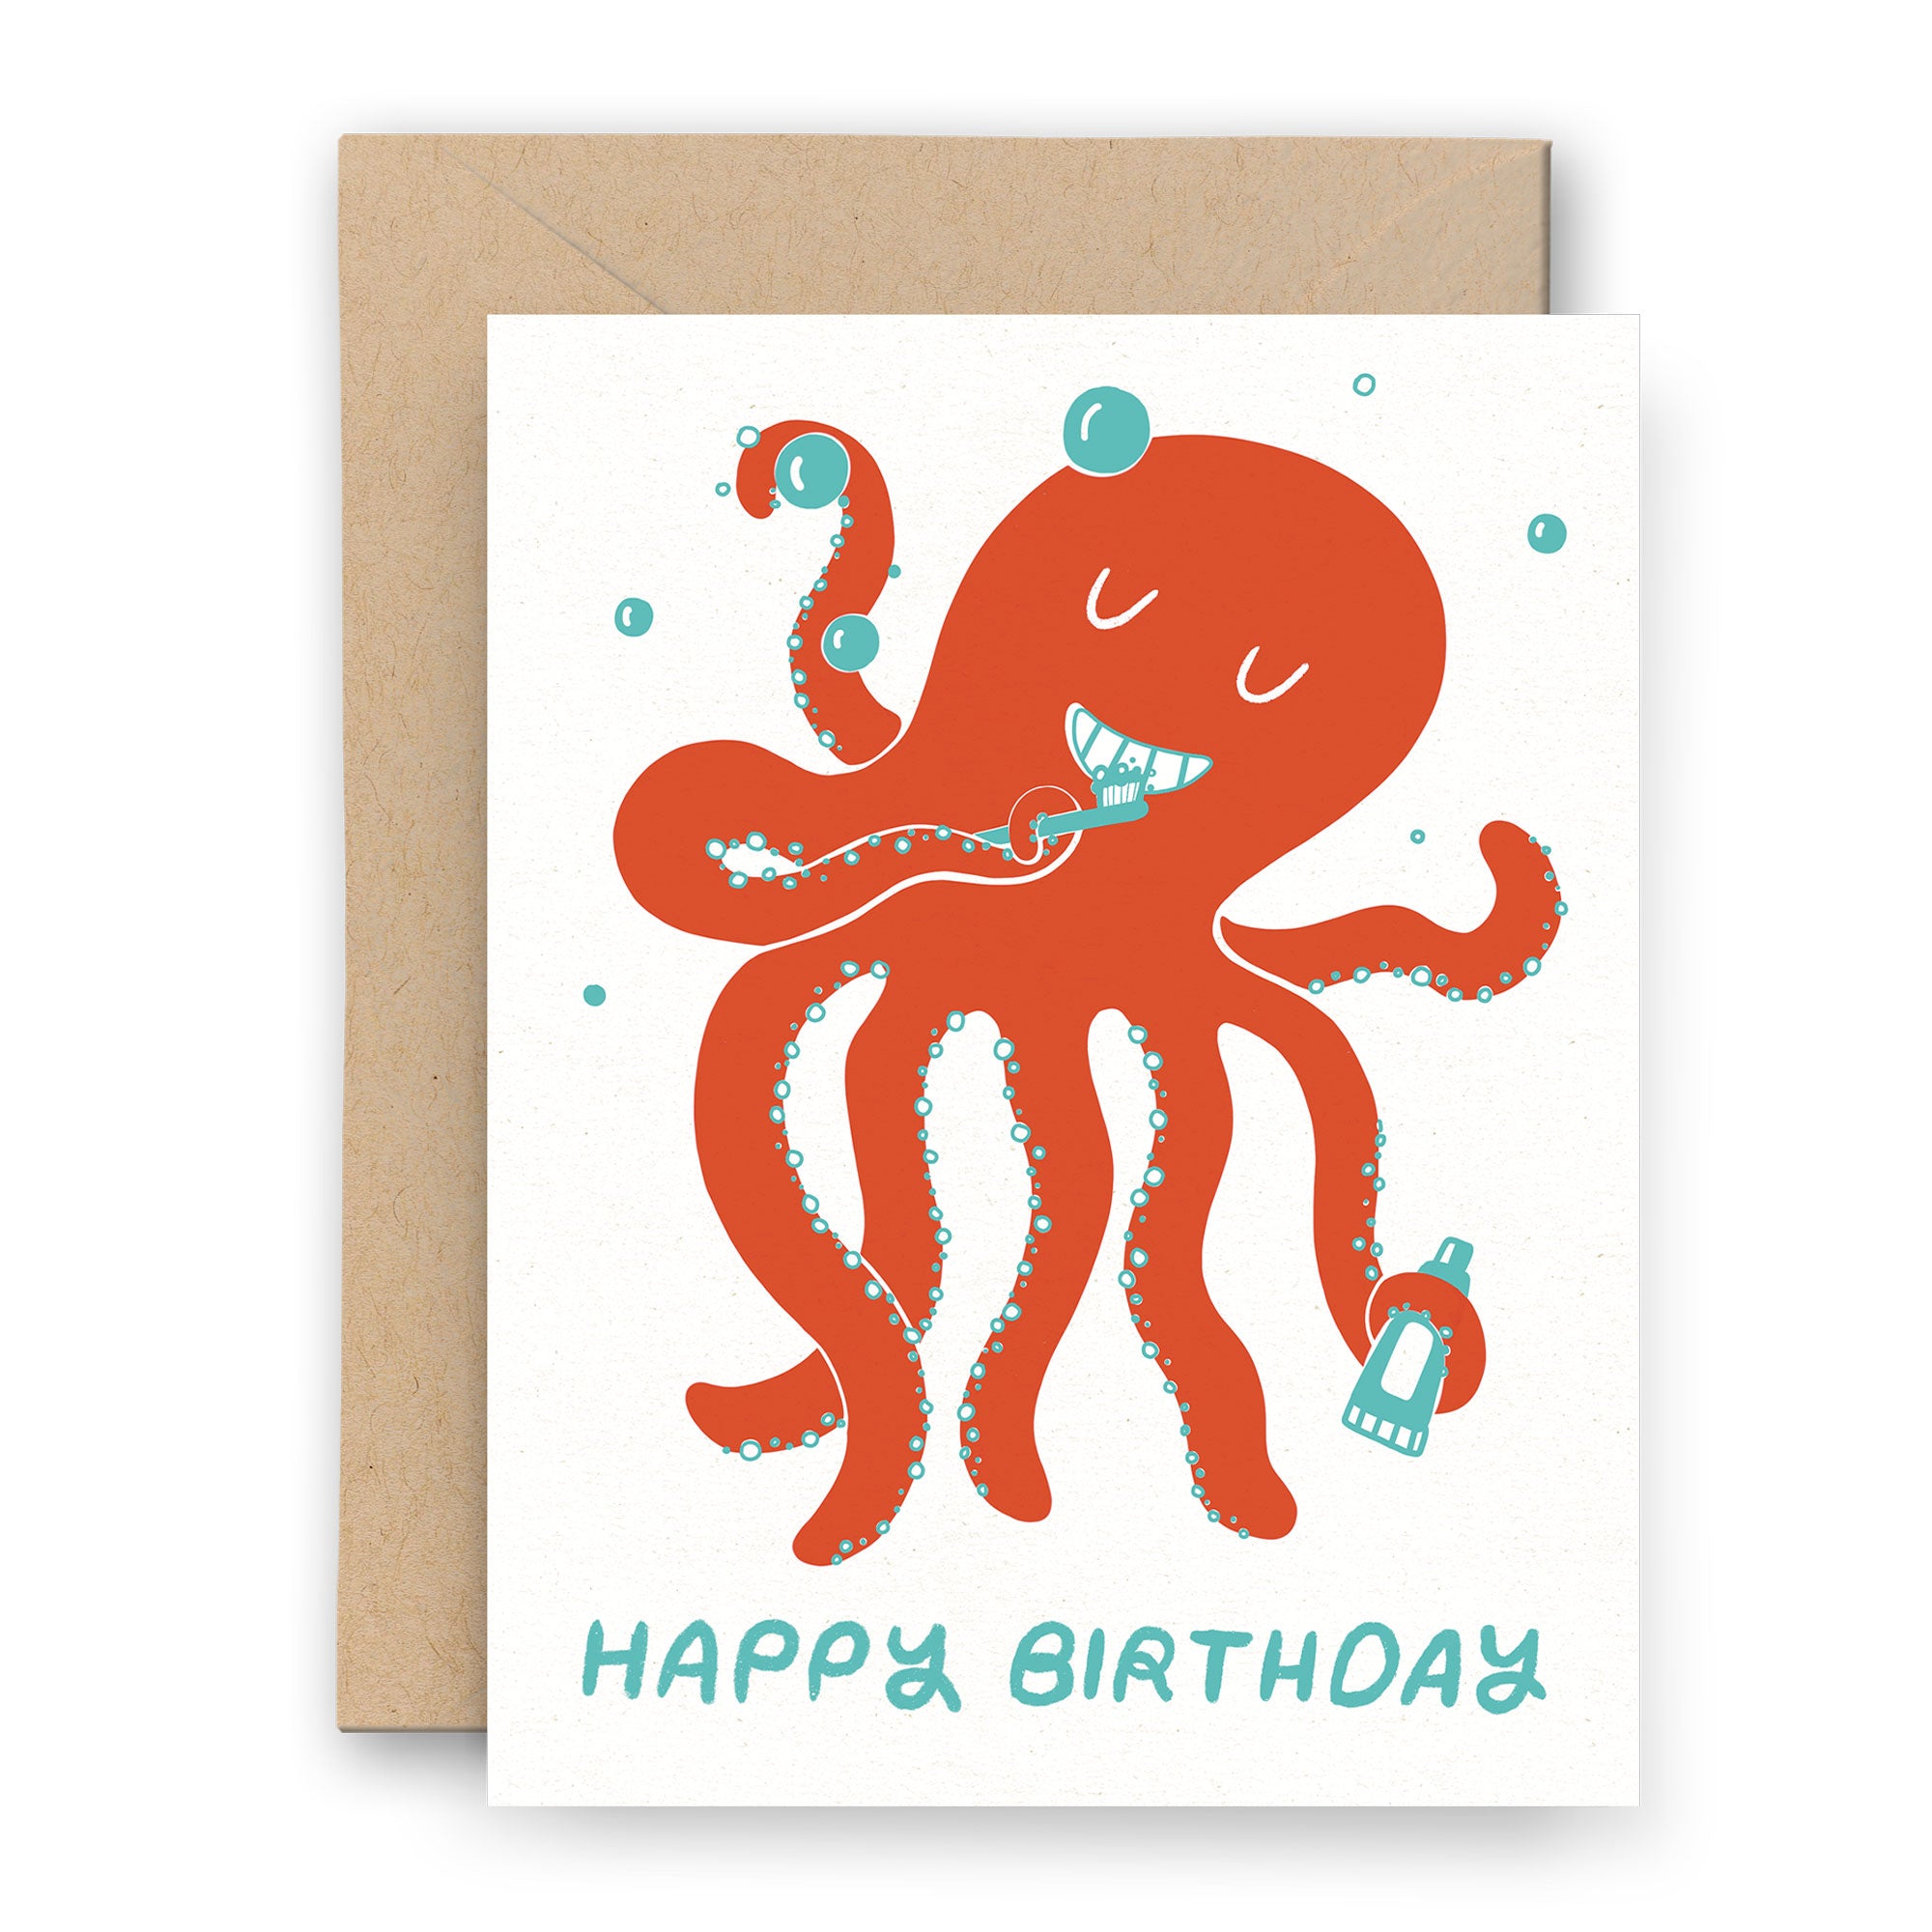 Letterpress greeting card with an octopus brushing his teeth and the text "Happy Birthday" below.